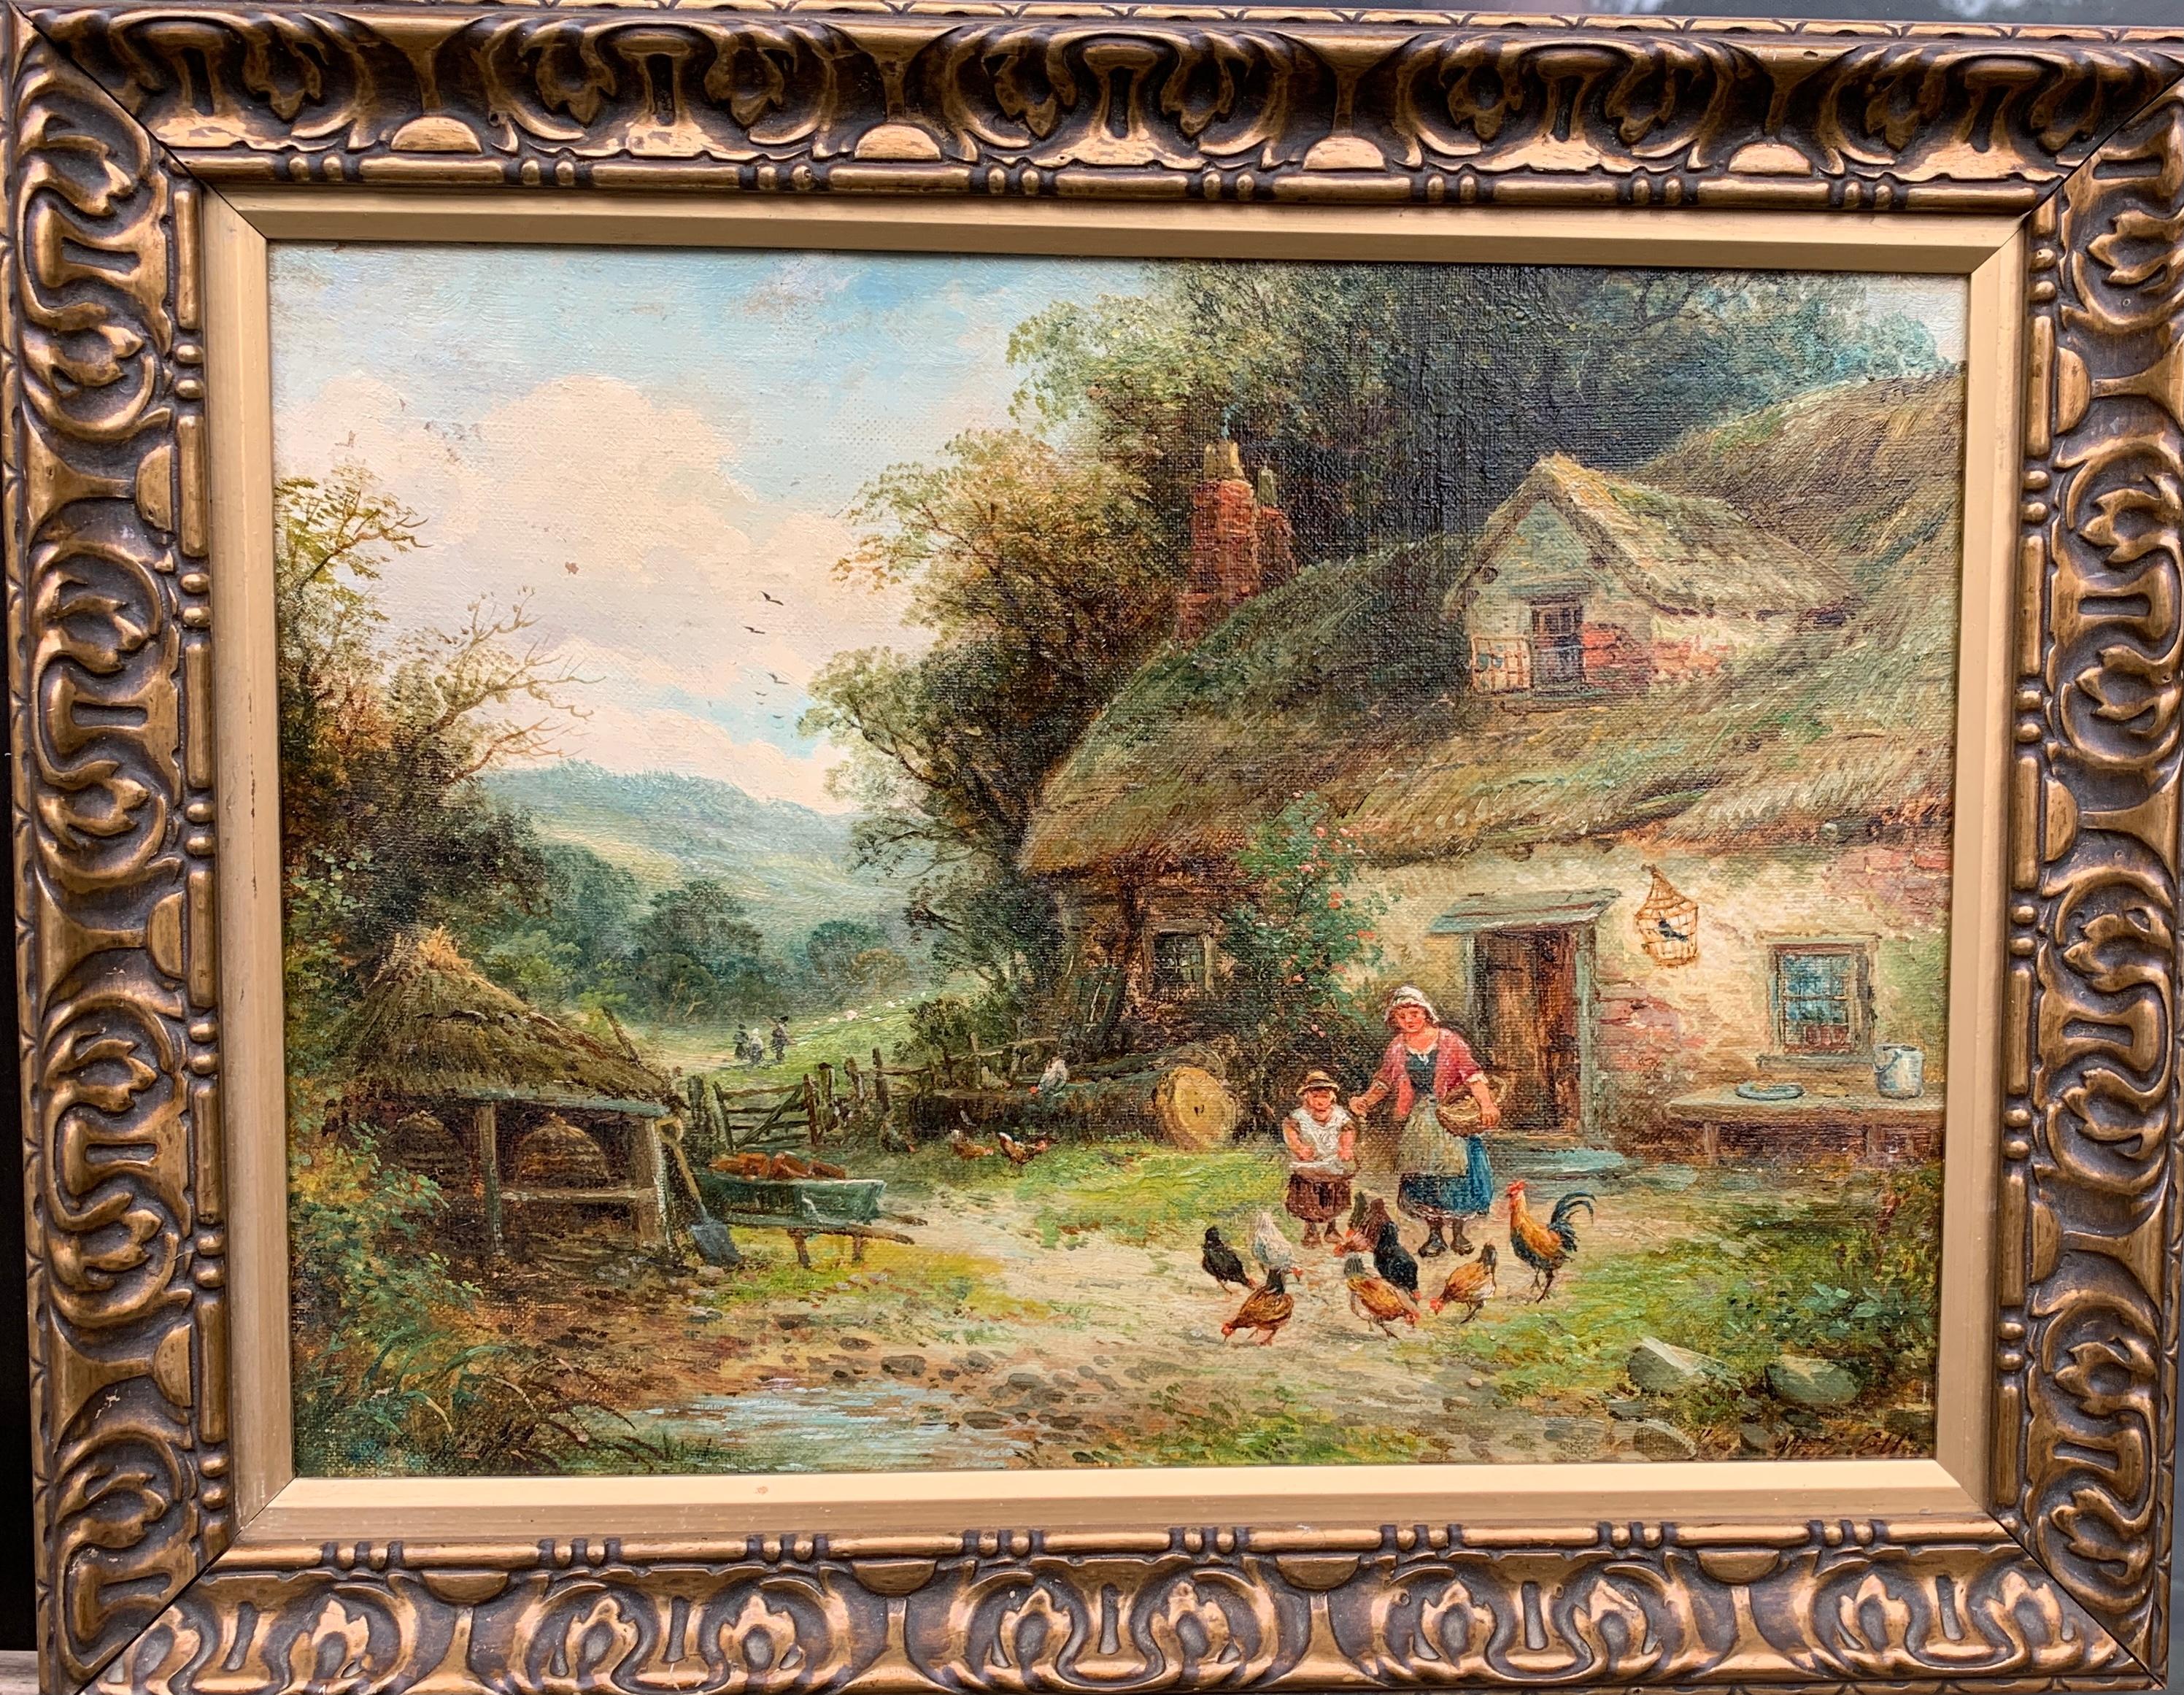 19th century English cottage landscape with mother and child feeding chickens